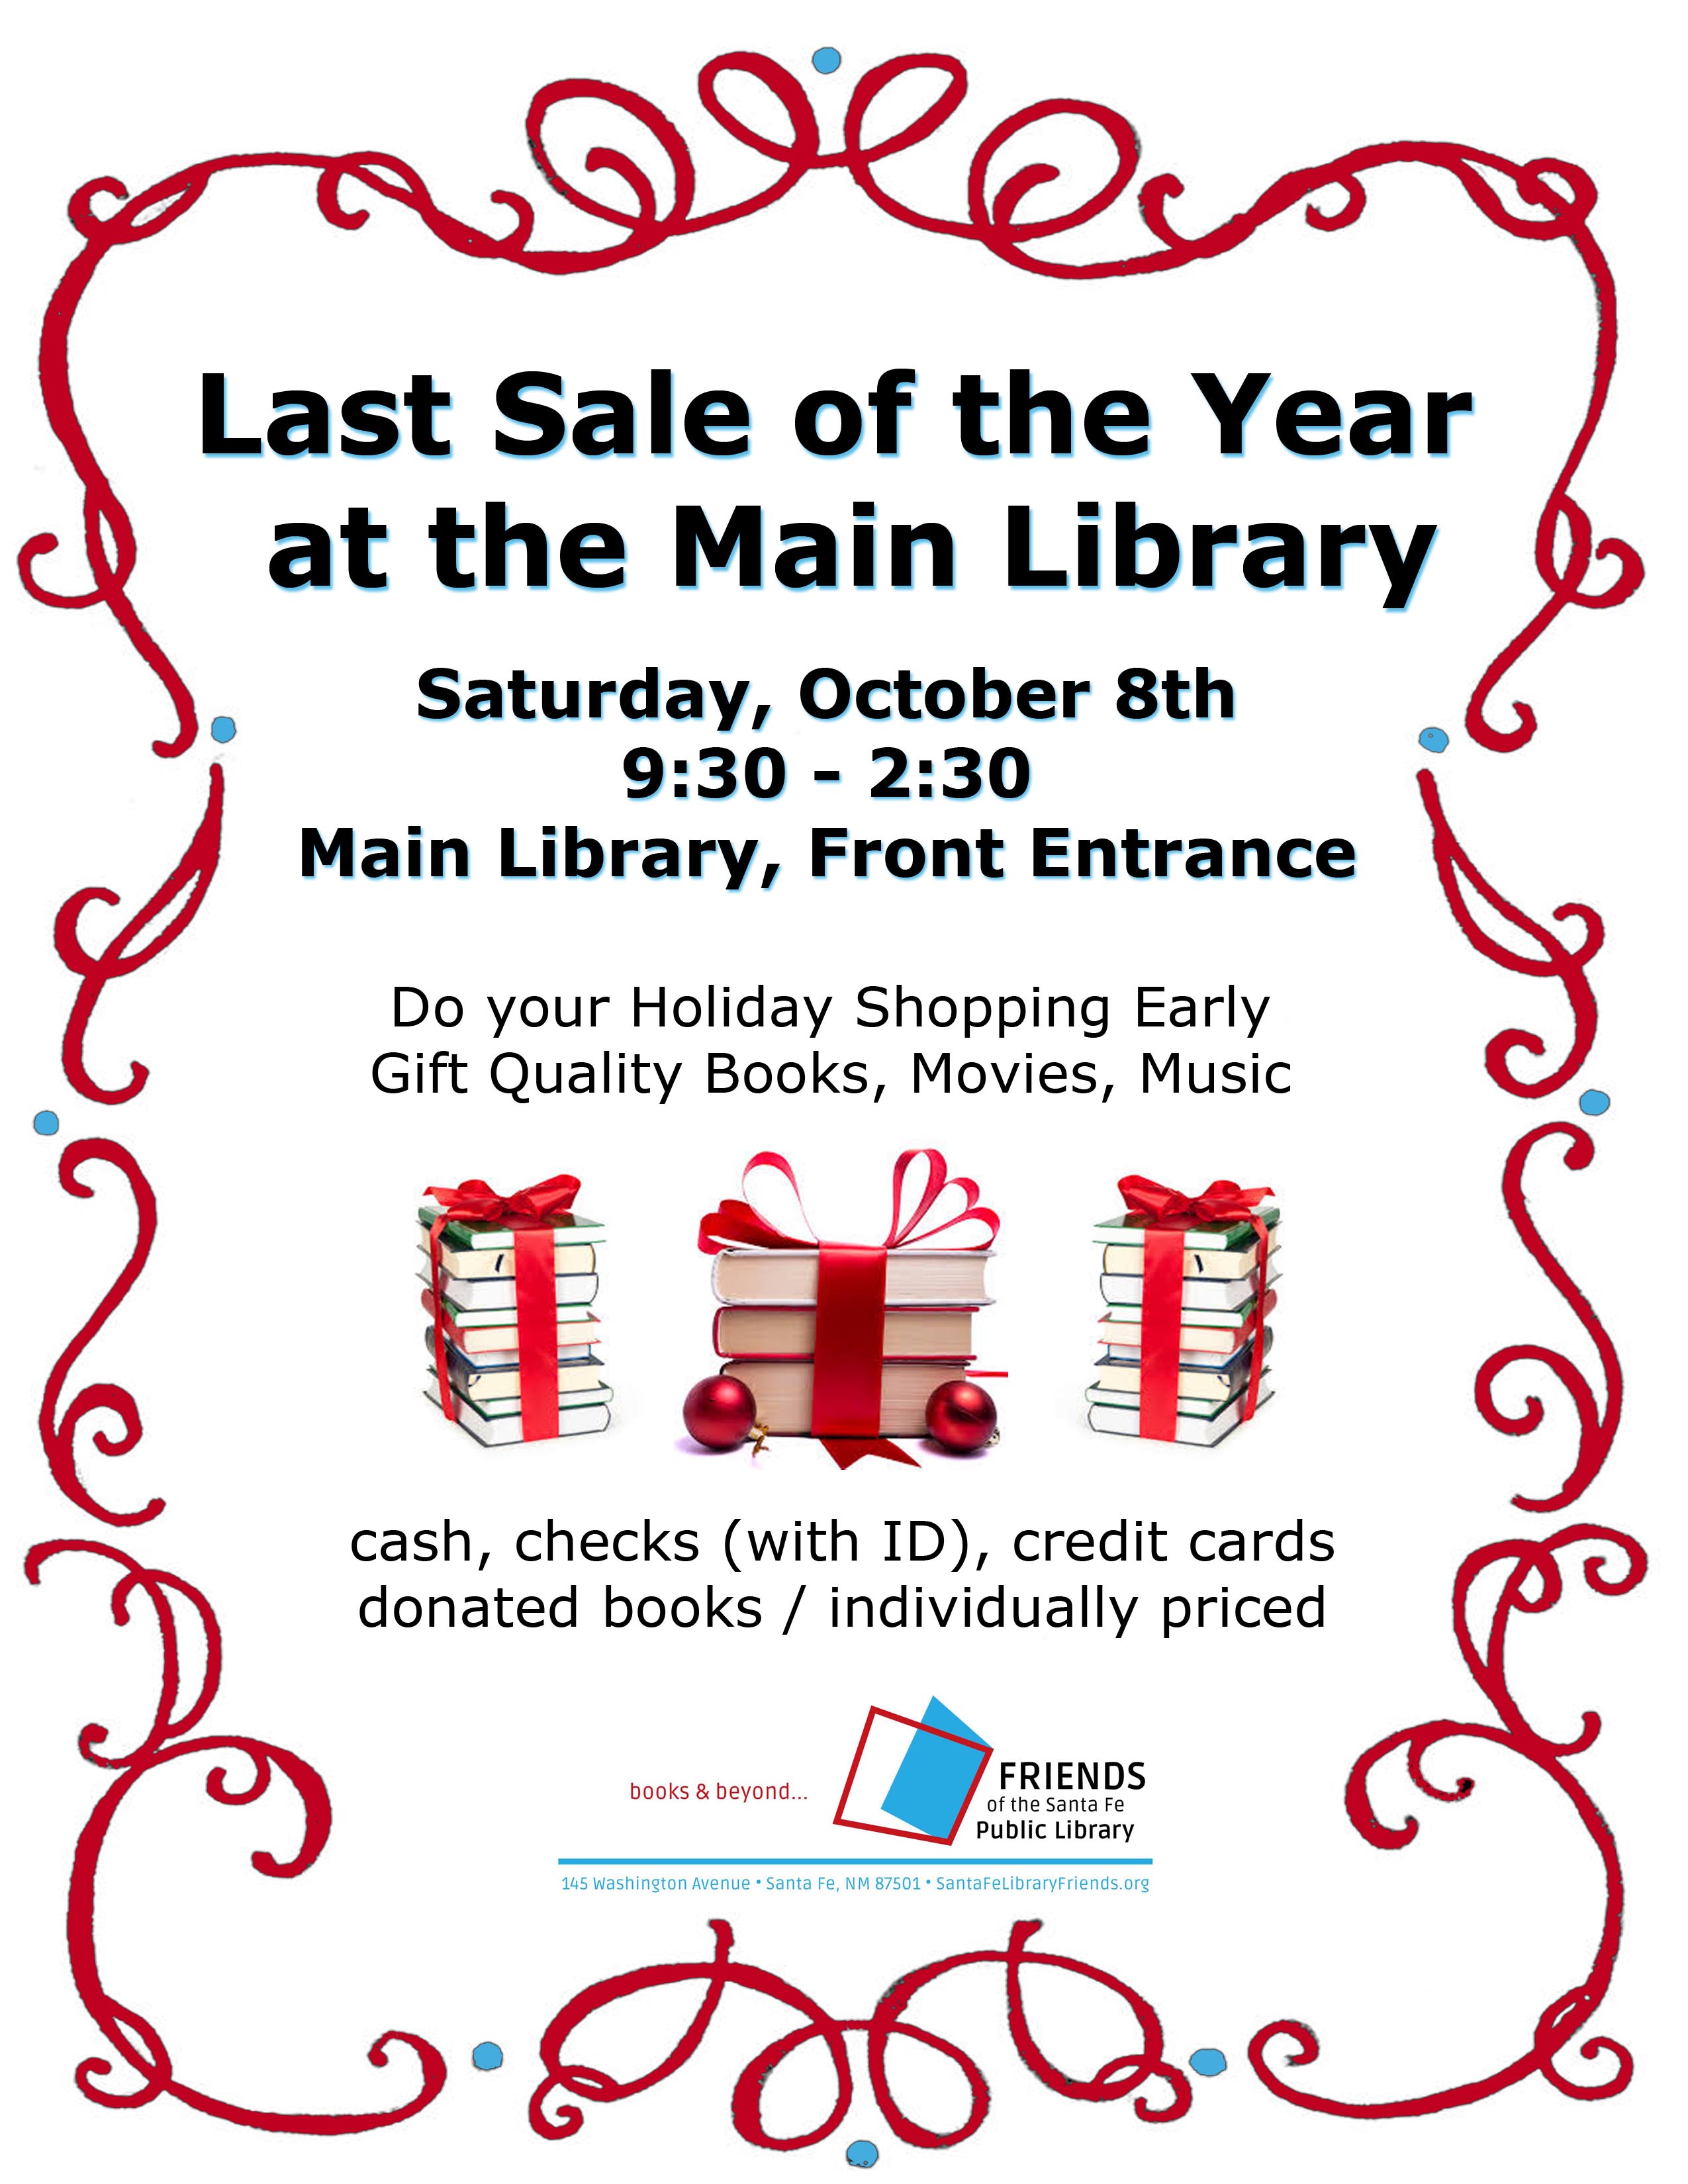 Last Sale of the year at the Main Library